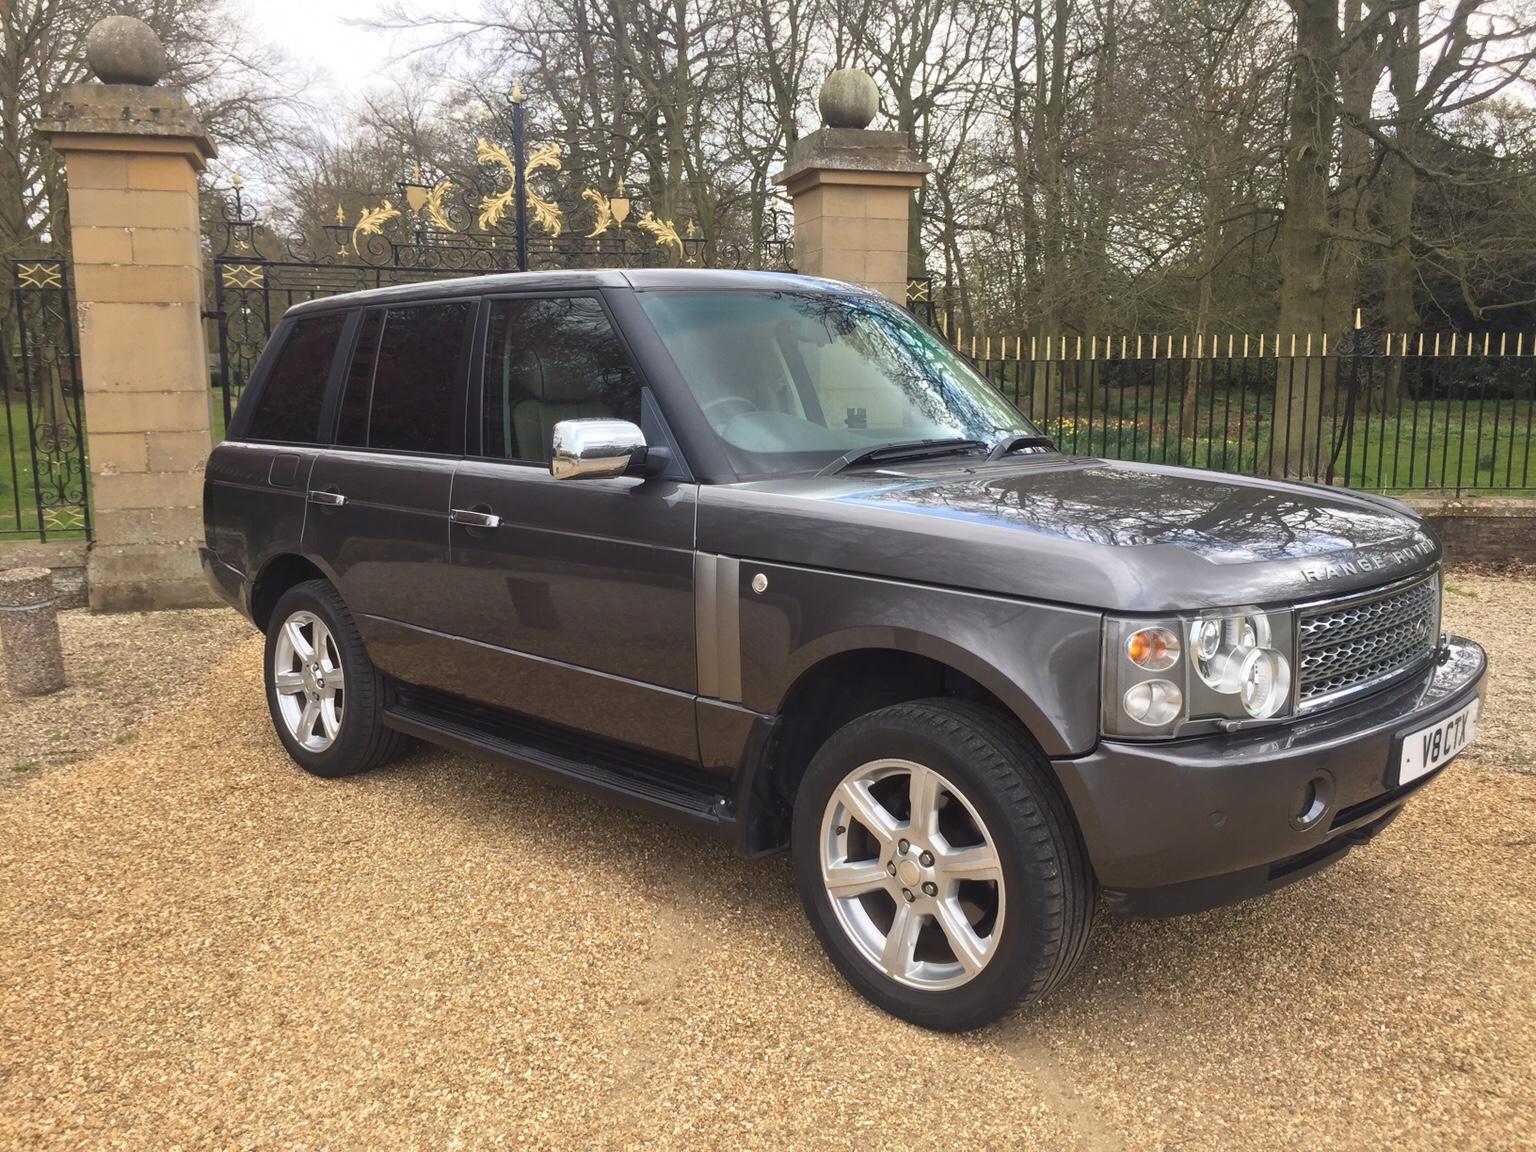 Range Rover L322 4 4 Vogue Lpg In Scunthorpe For 4 250 00